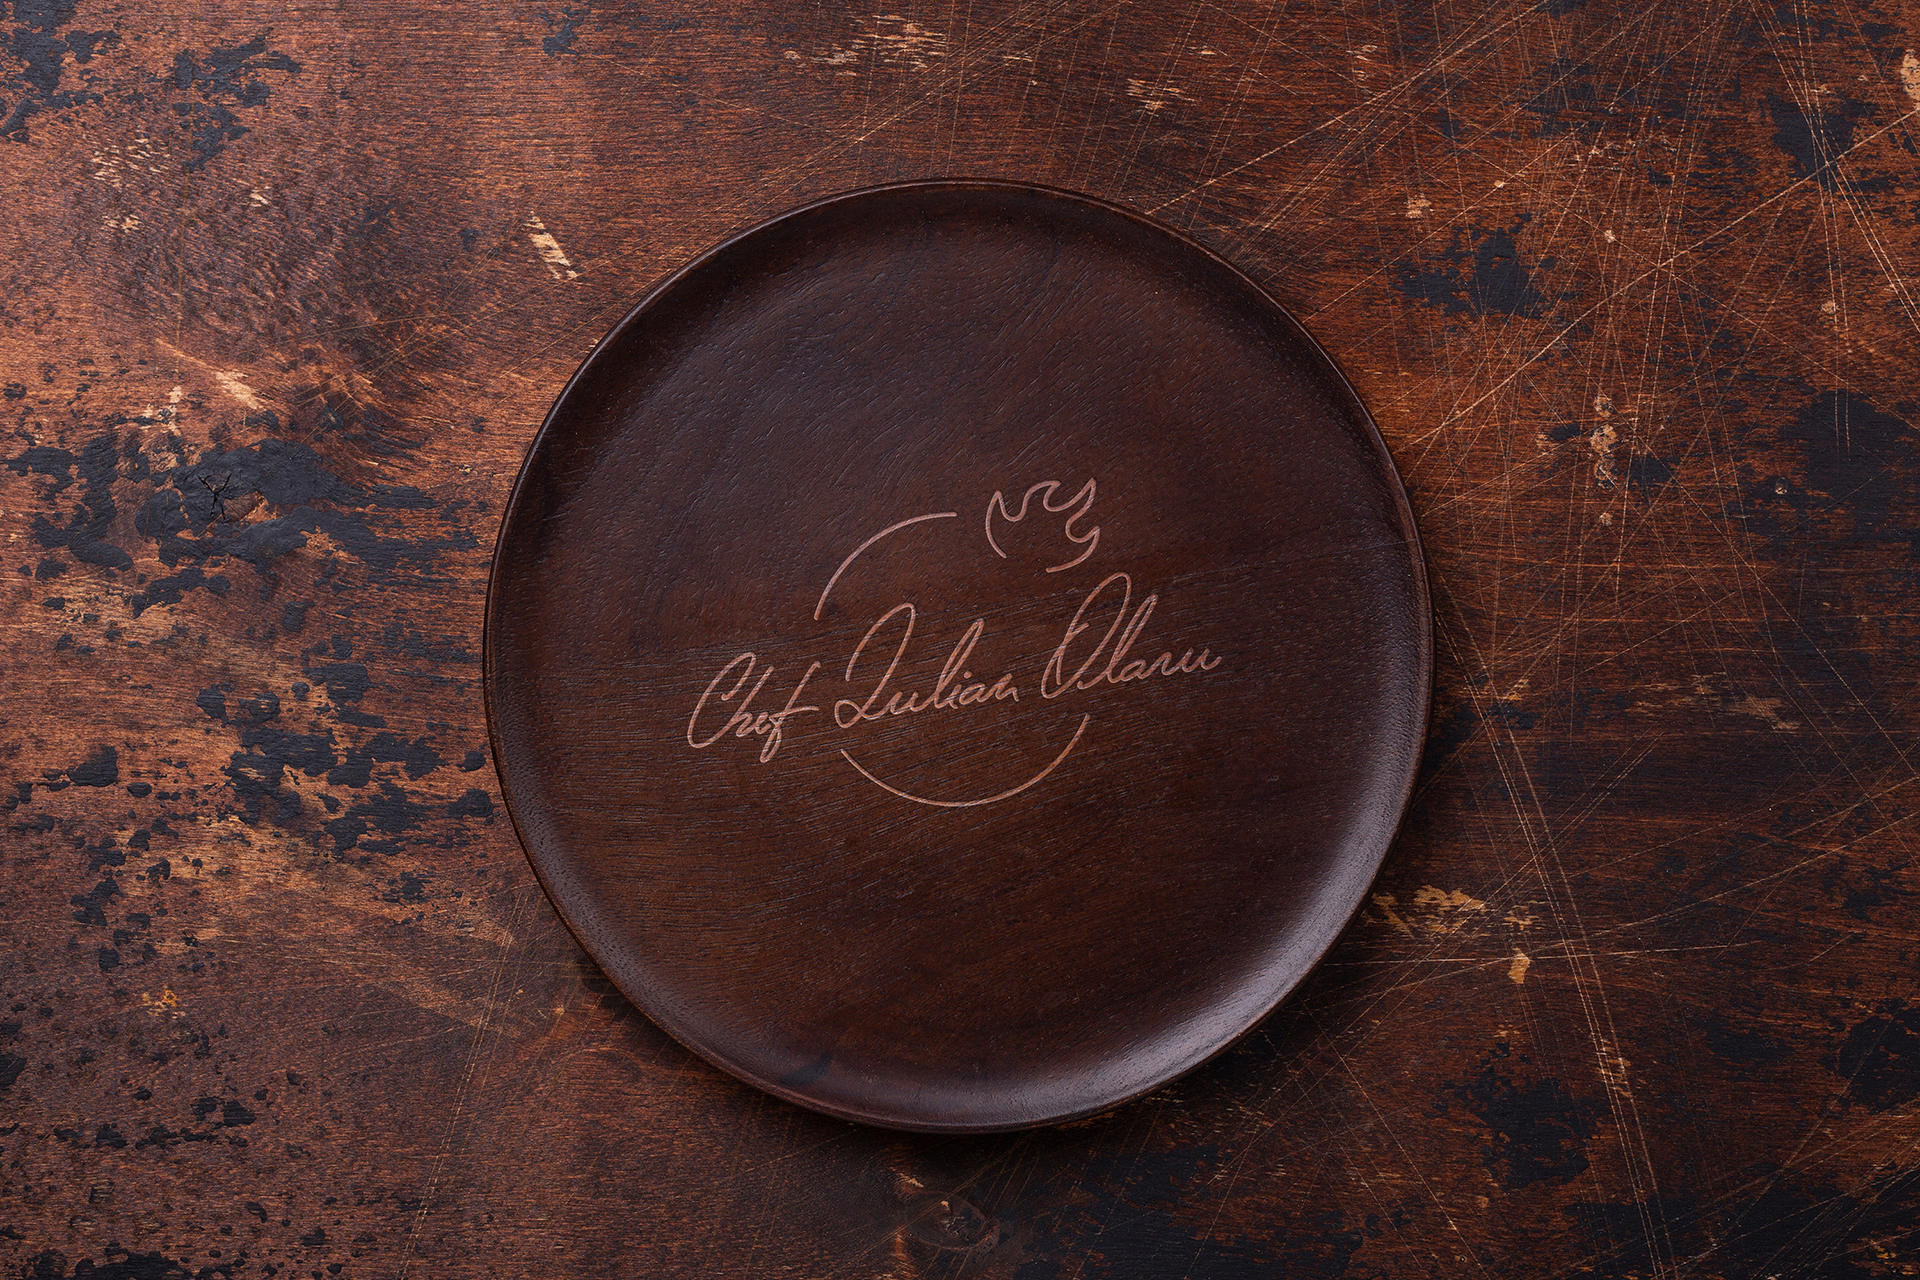 Empty,Plate,And,Linen,Napkin,On,Brown,Wooden,Background,Copy